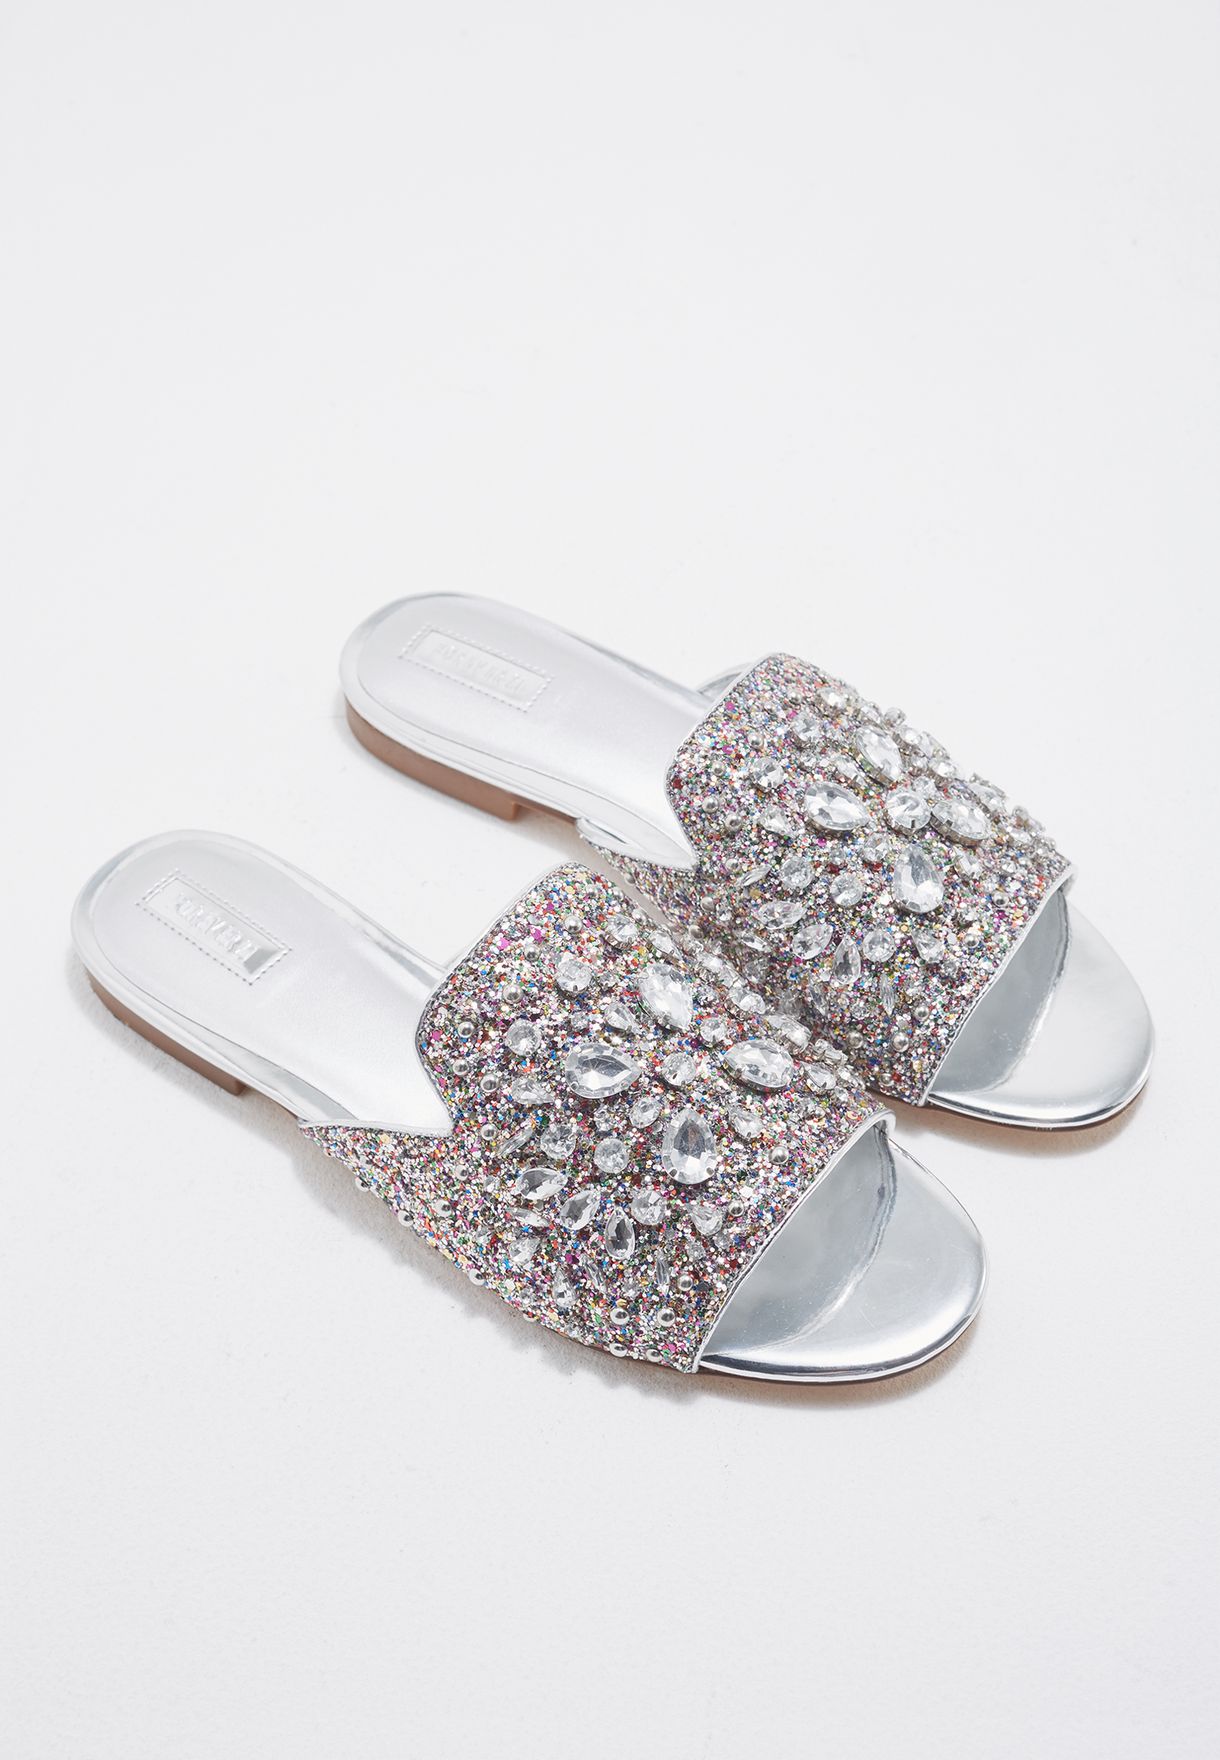 forever 21 silver sandals